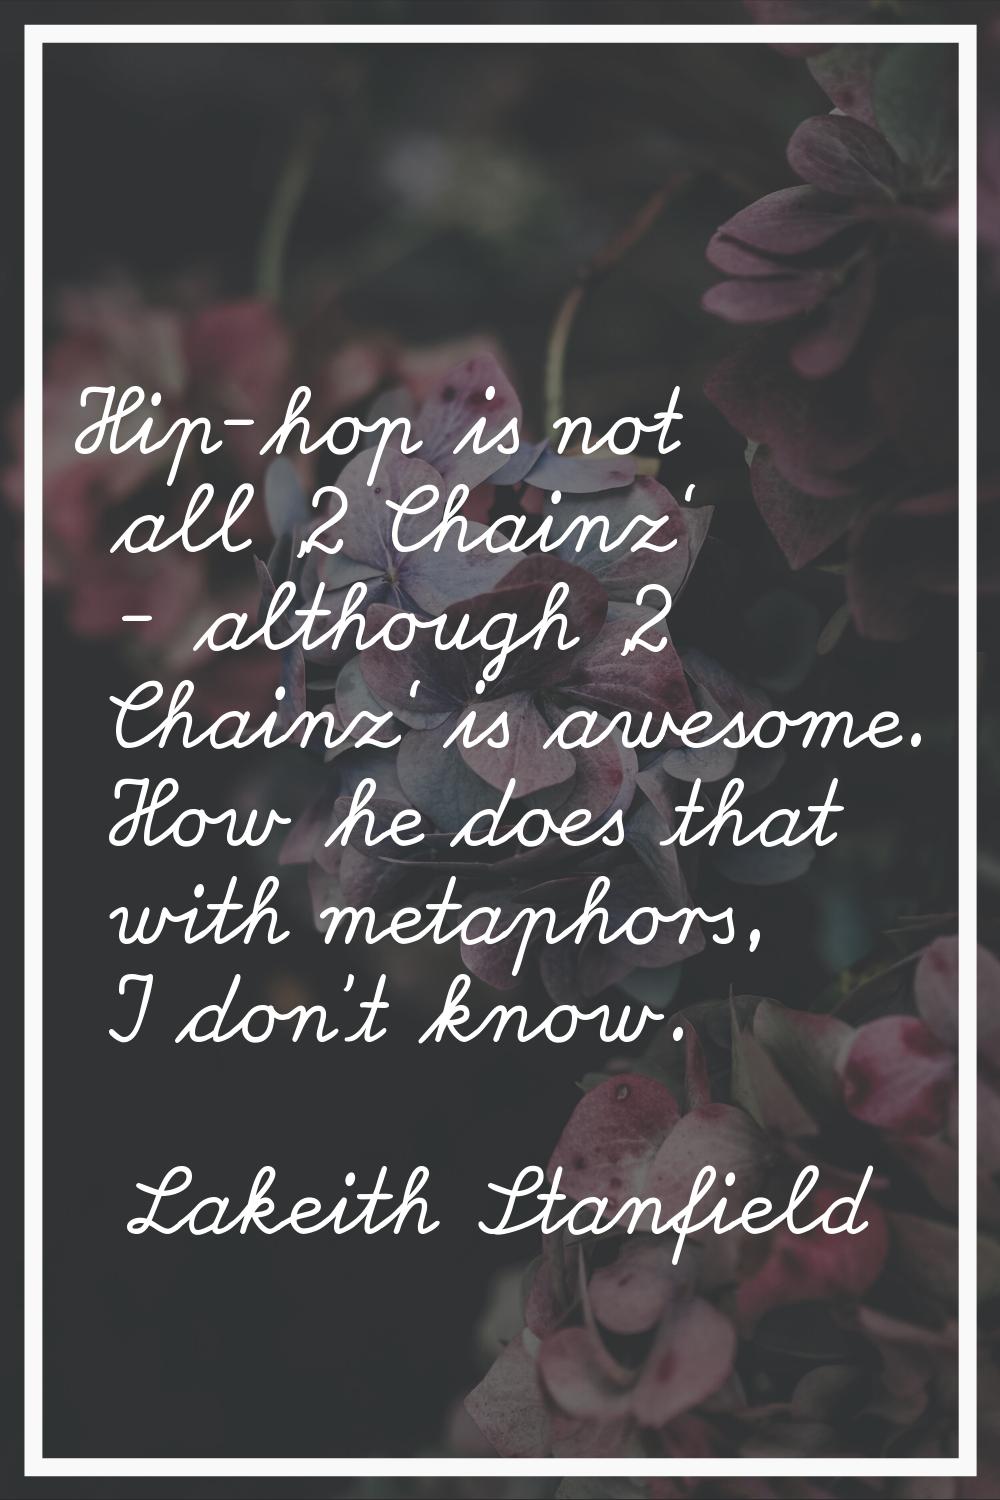 Hip-hop is not all '2 Chainz' - although '2 Chainz' is awesome. How he does that with metaphors, I 